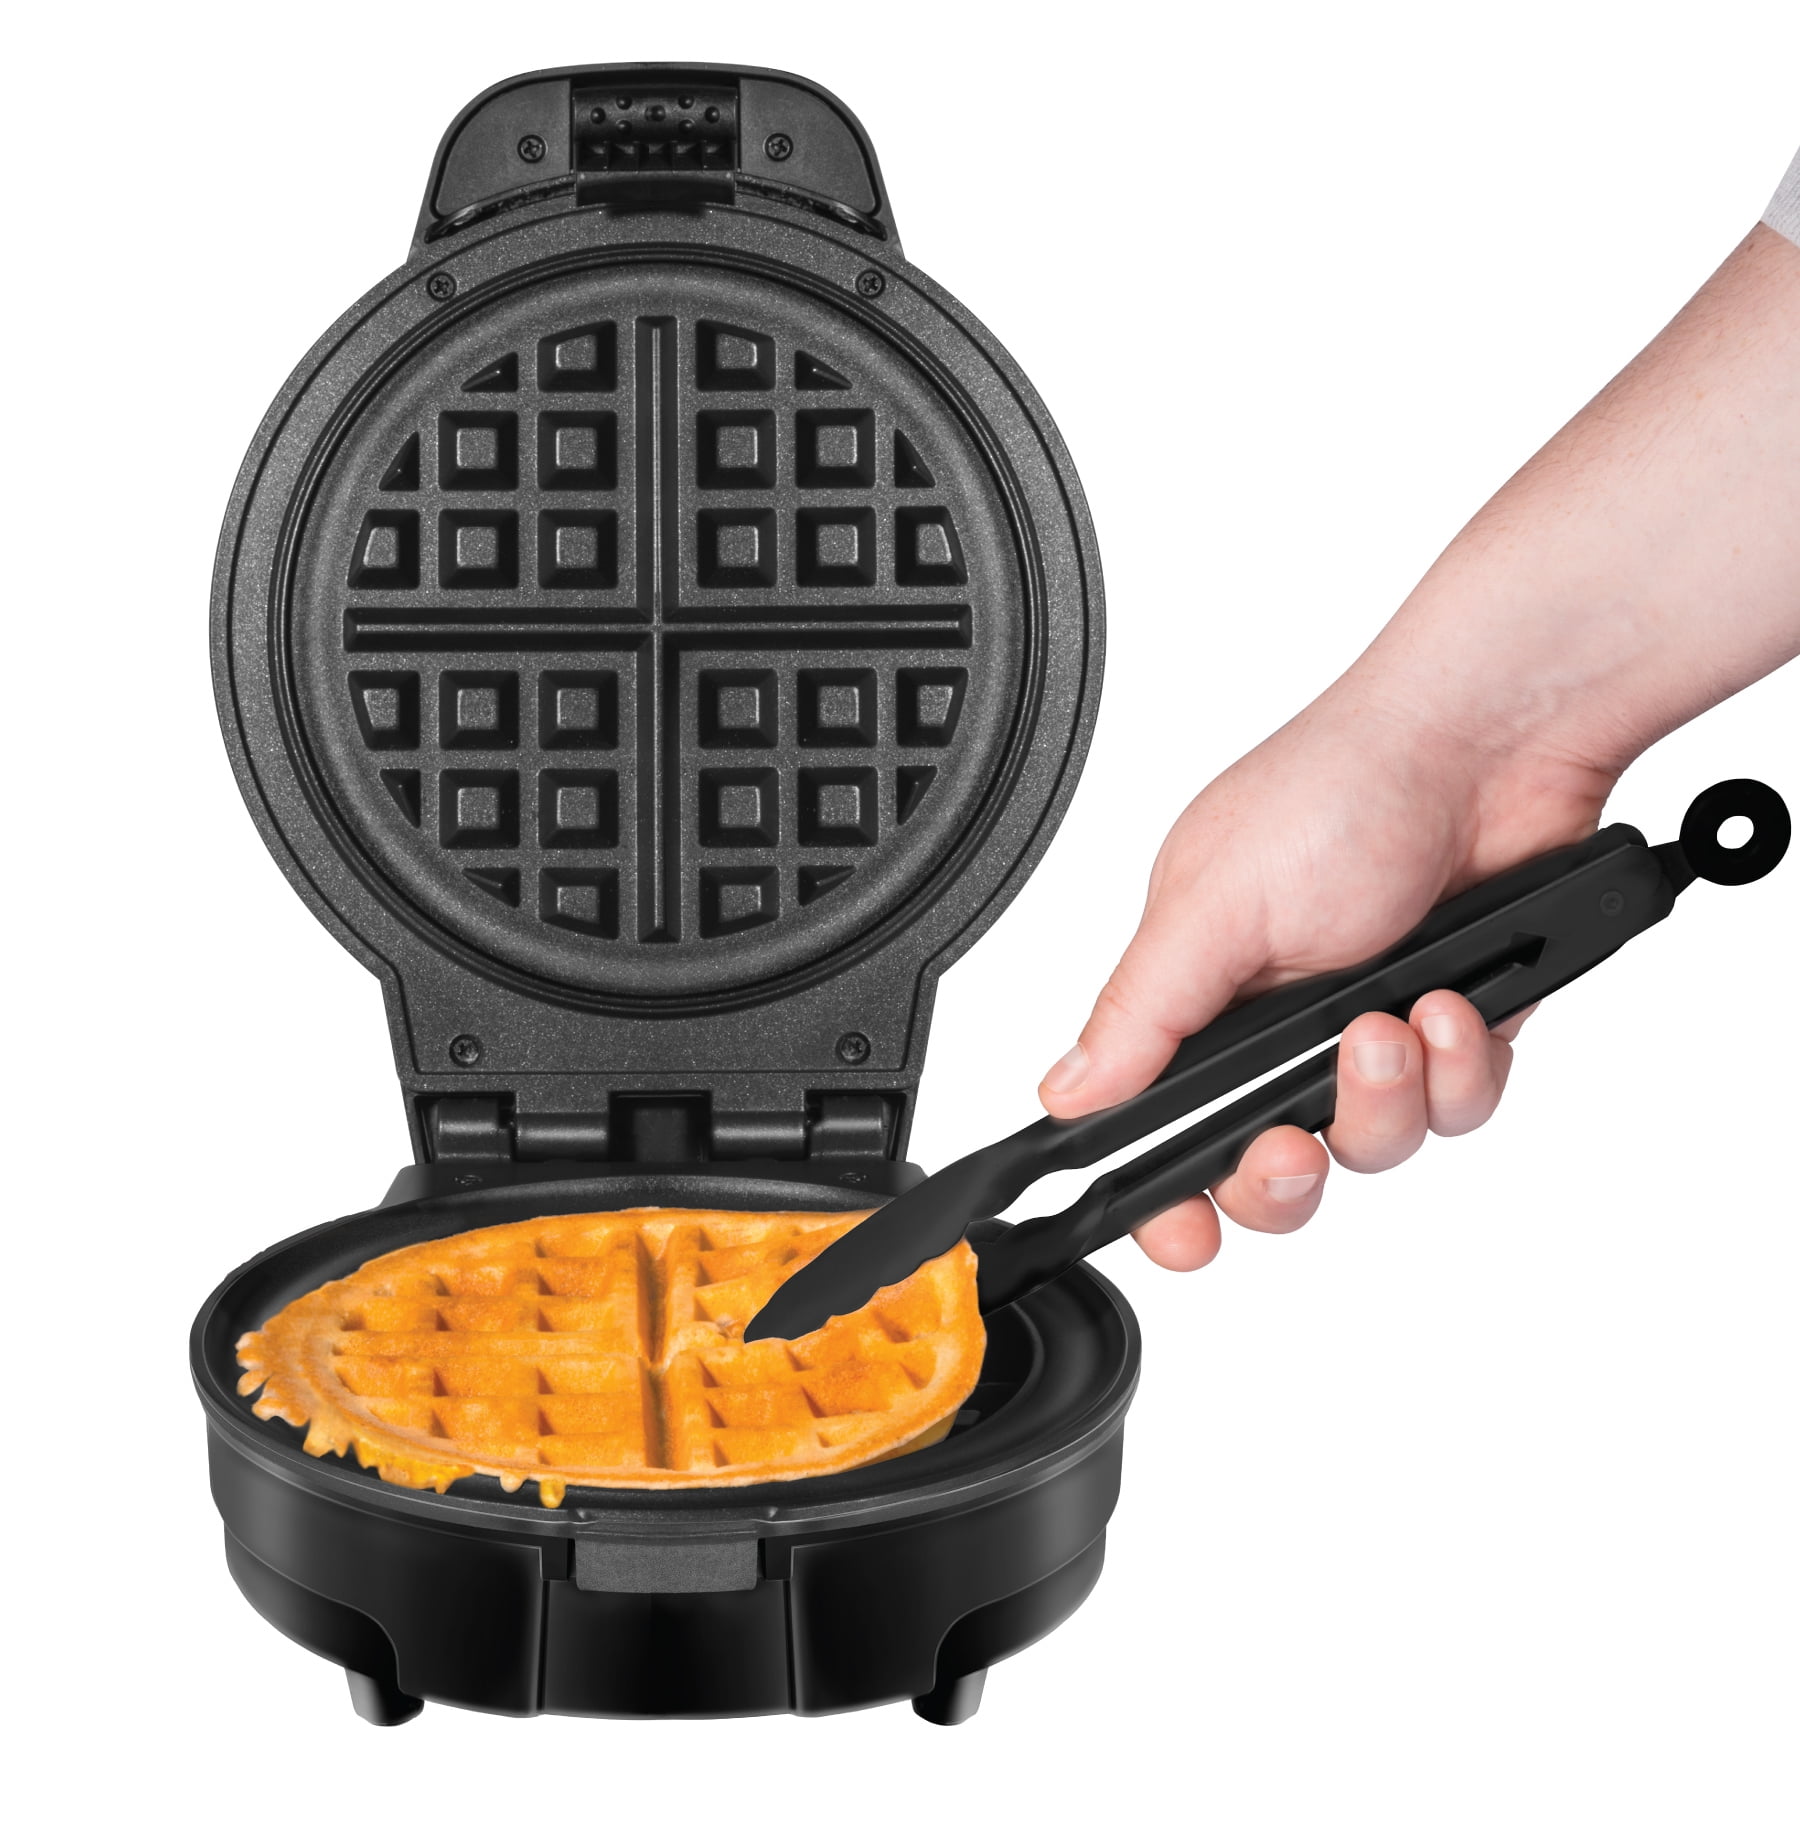 Chefman Anti-Overflow Belgian Maker w/Shade Selector & Mess Free Moat Round Waffle-Iron w/Nonstick Plates & Cool Touch Handle Renewed Grey Measuring Cup Included 